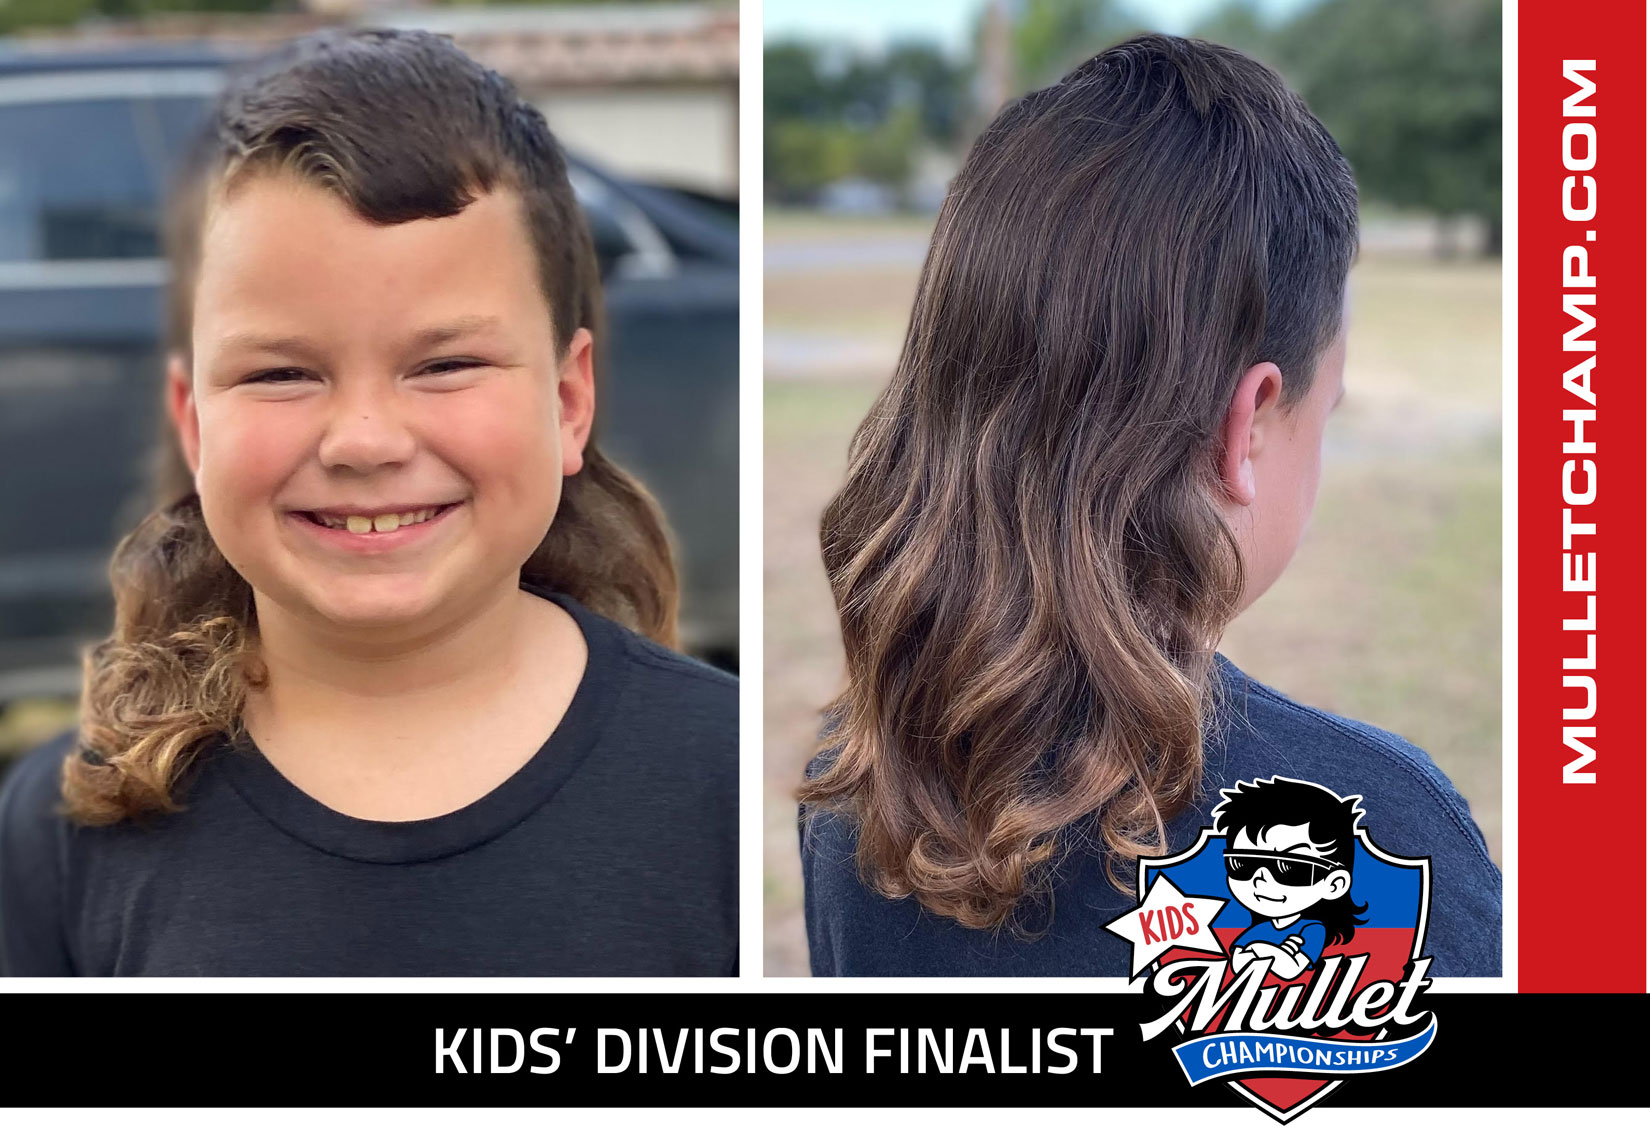 Collin County Boy Hopes to Repeat Title as Best Mullet in the Country